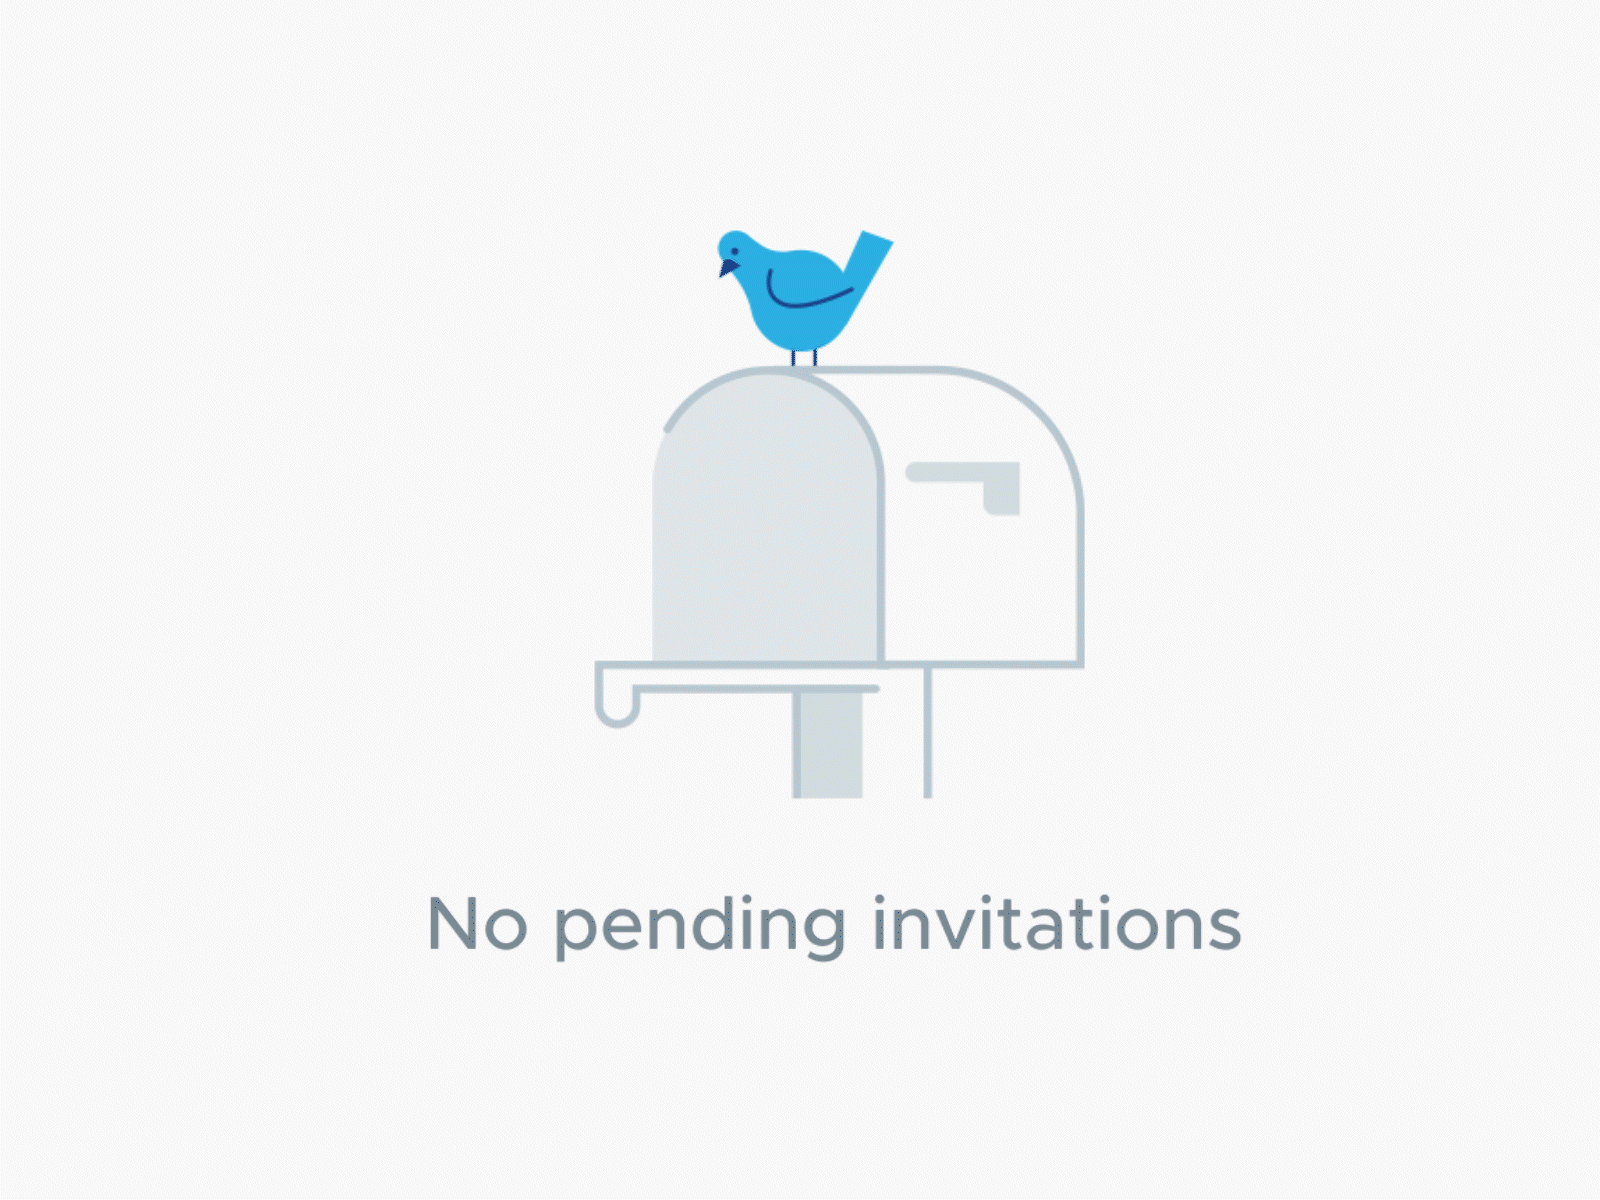 Empty state for "No pending invitations" animation empty state invitation motion design